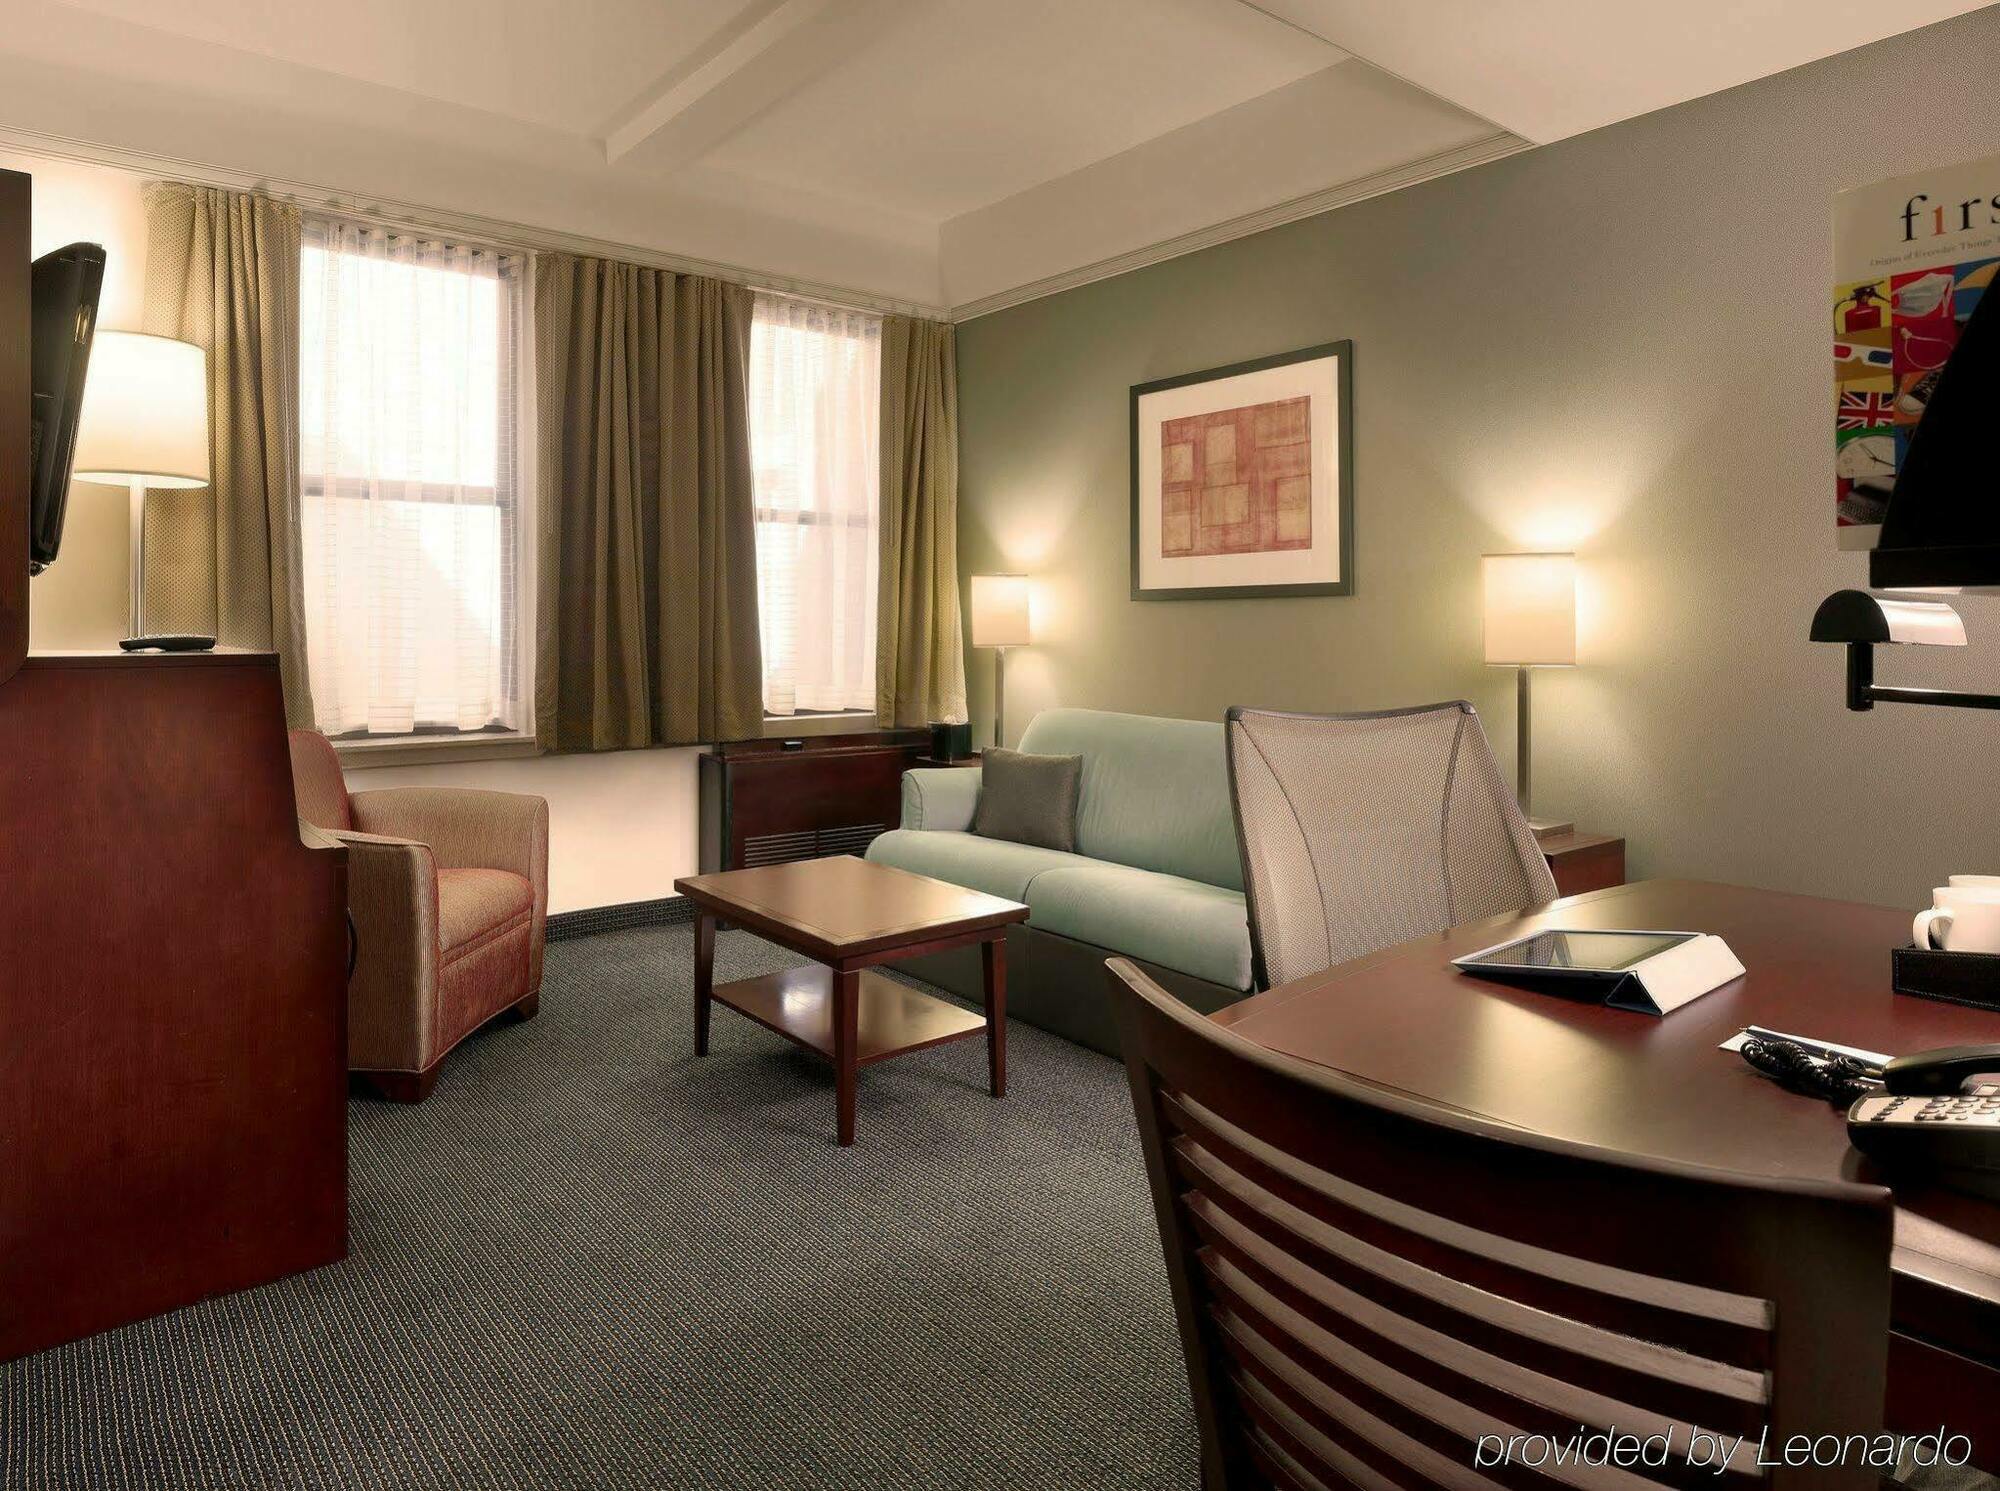 HOTEL CLUB QUARTERS MIDTOWN - TIMES SQUARE NEW YORK, NY 4* (United States)  - from US$ 251 | BOOKED